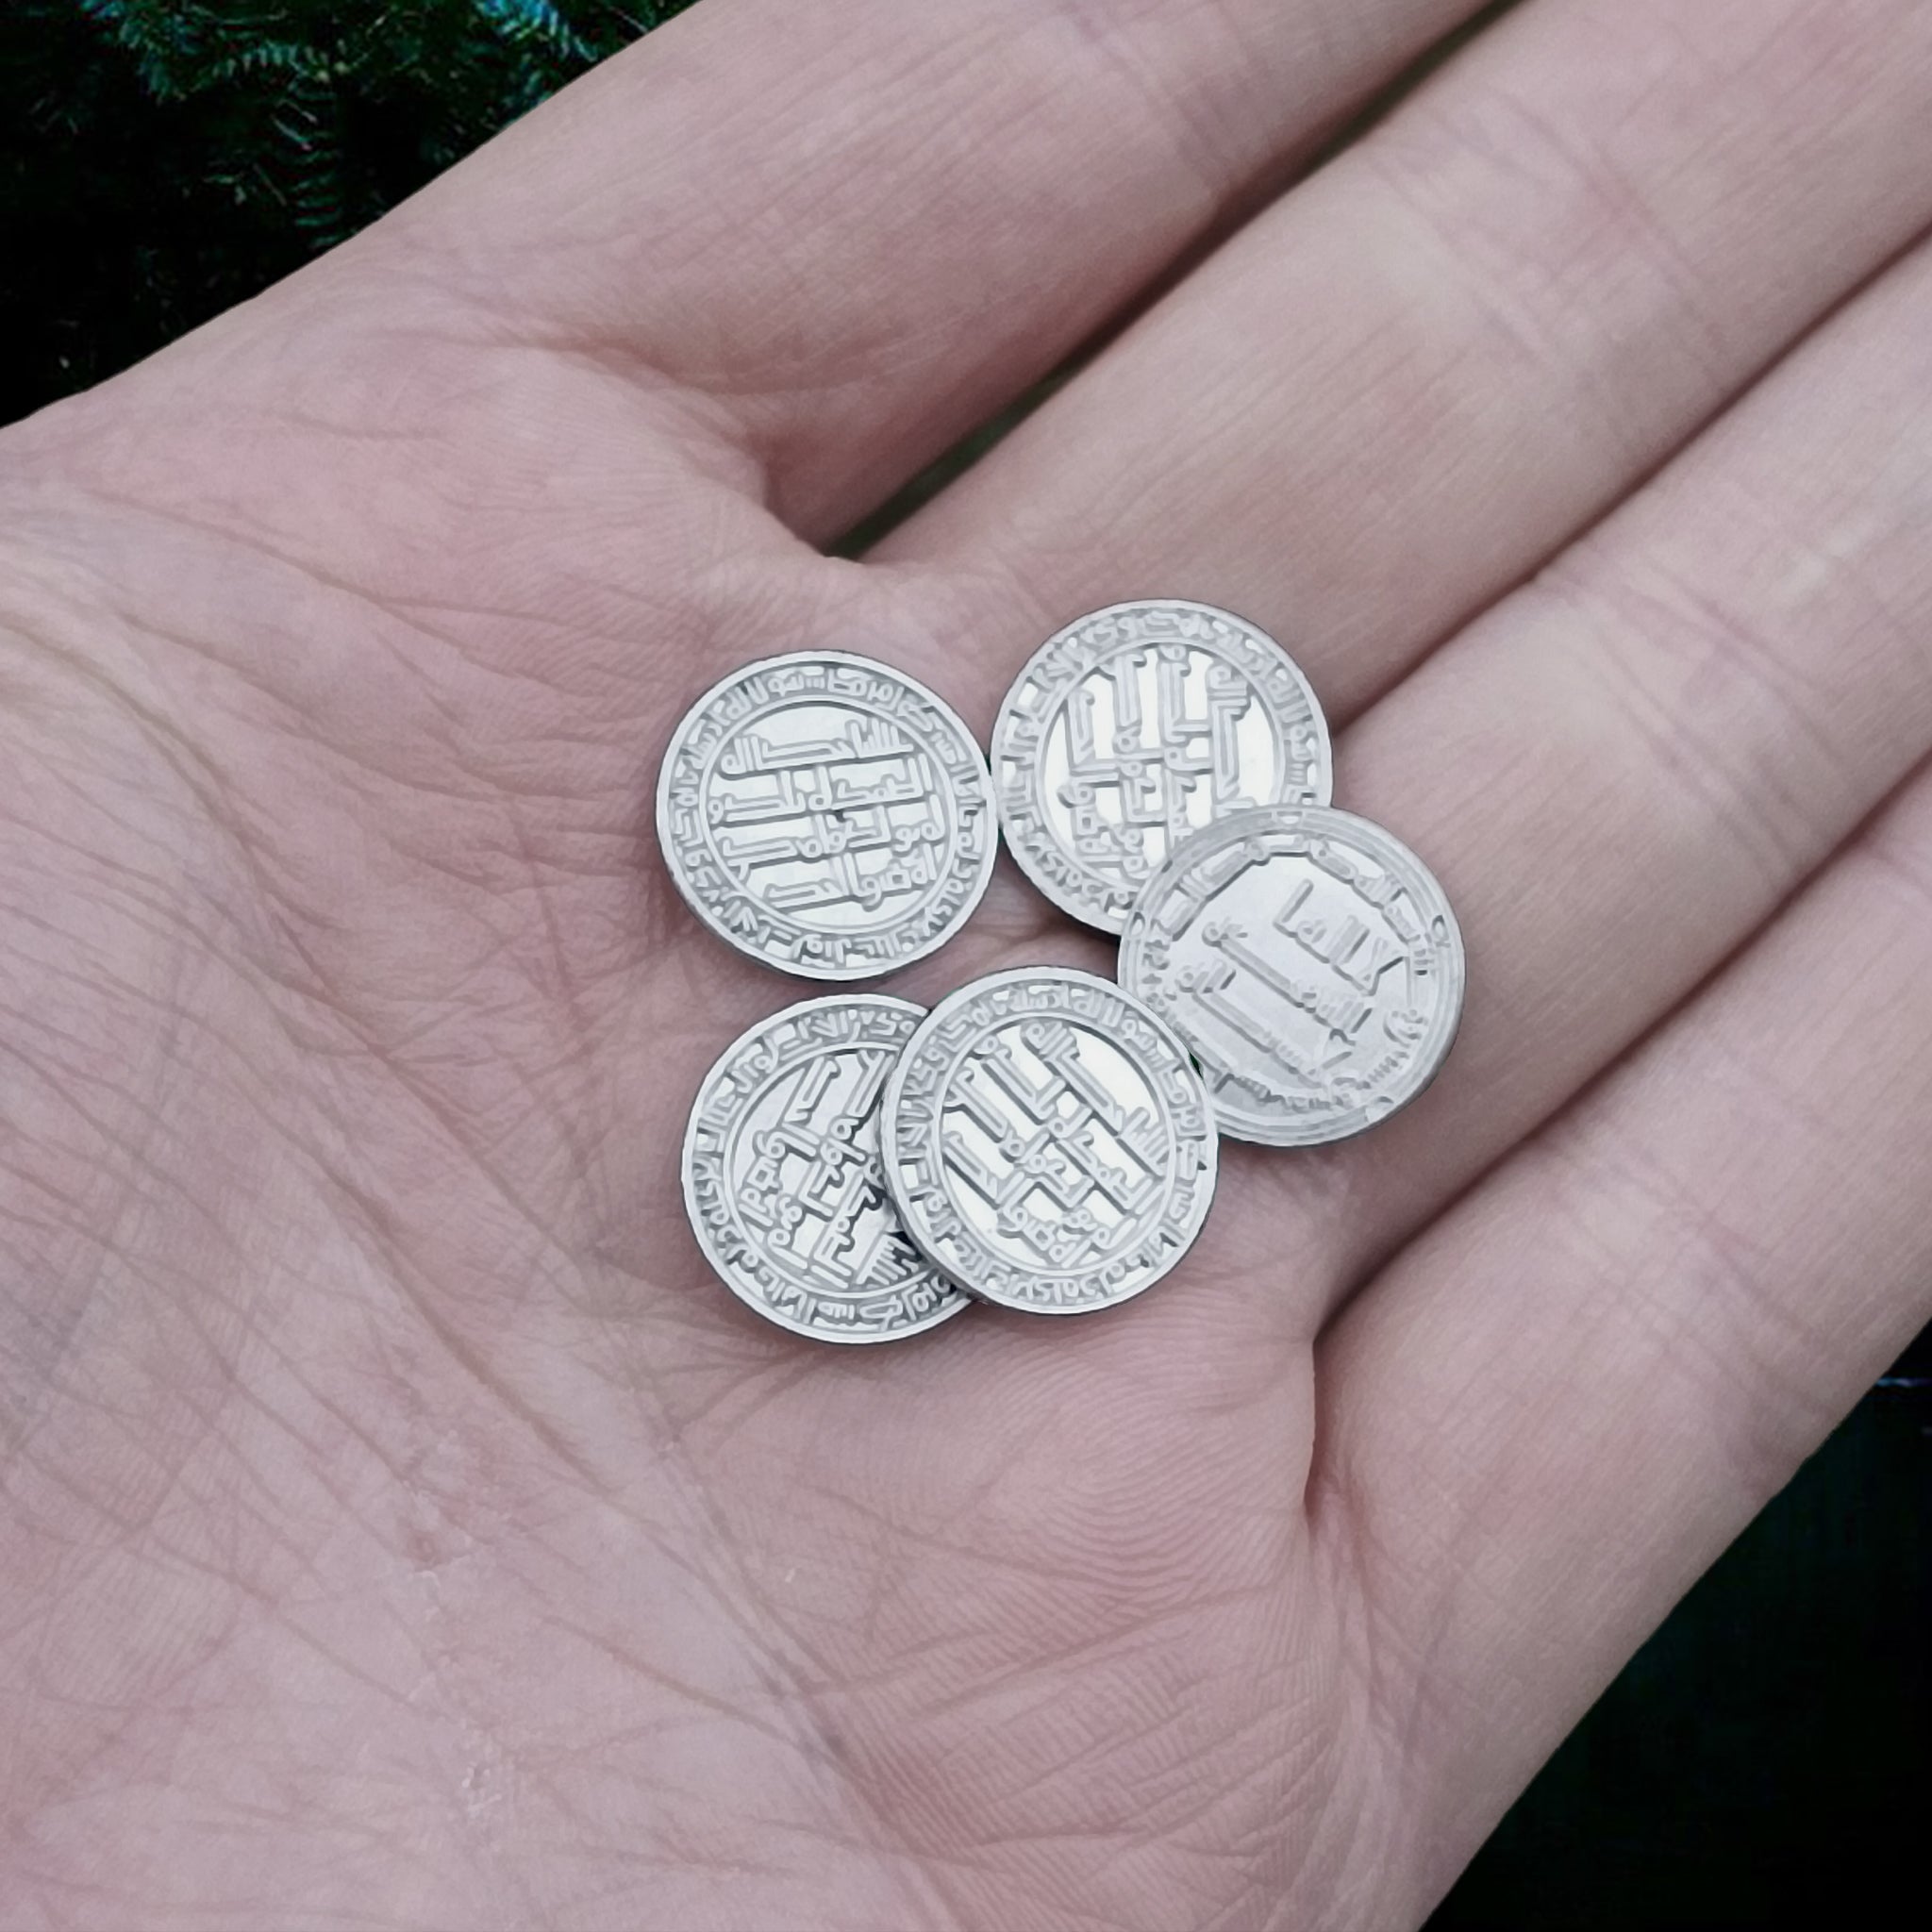 Replica Coins x 5 in hand, from the Isle of Skye - 10th Century Scotland, UK